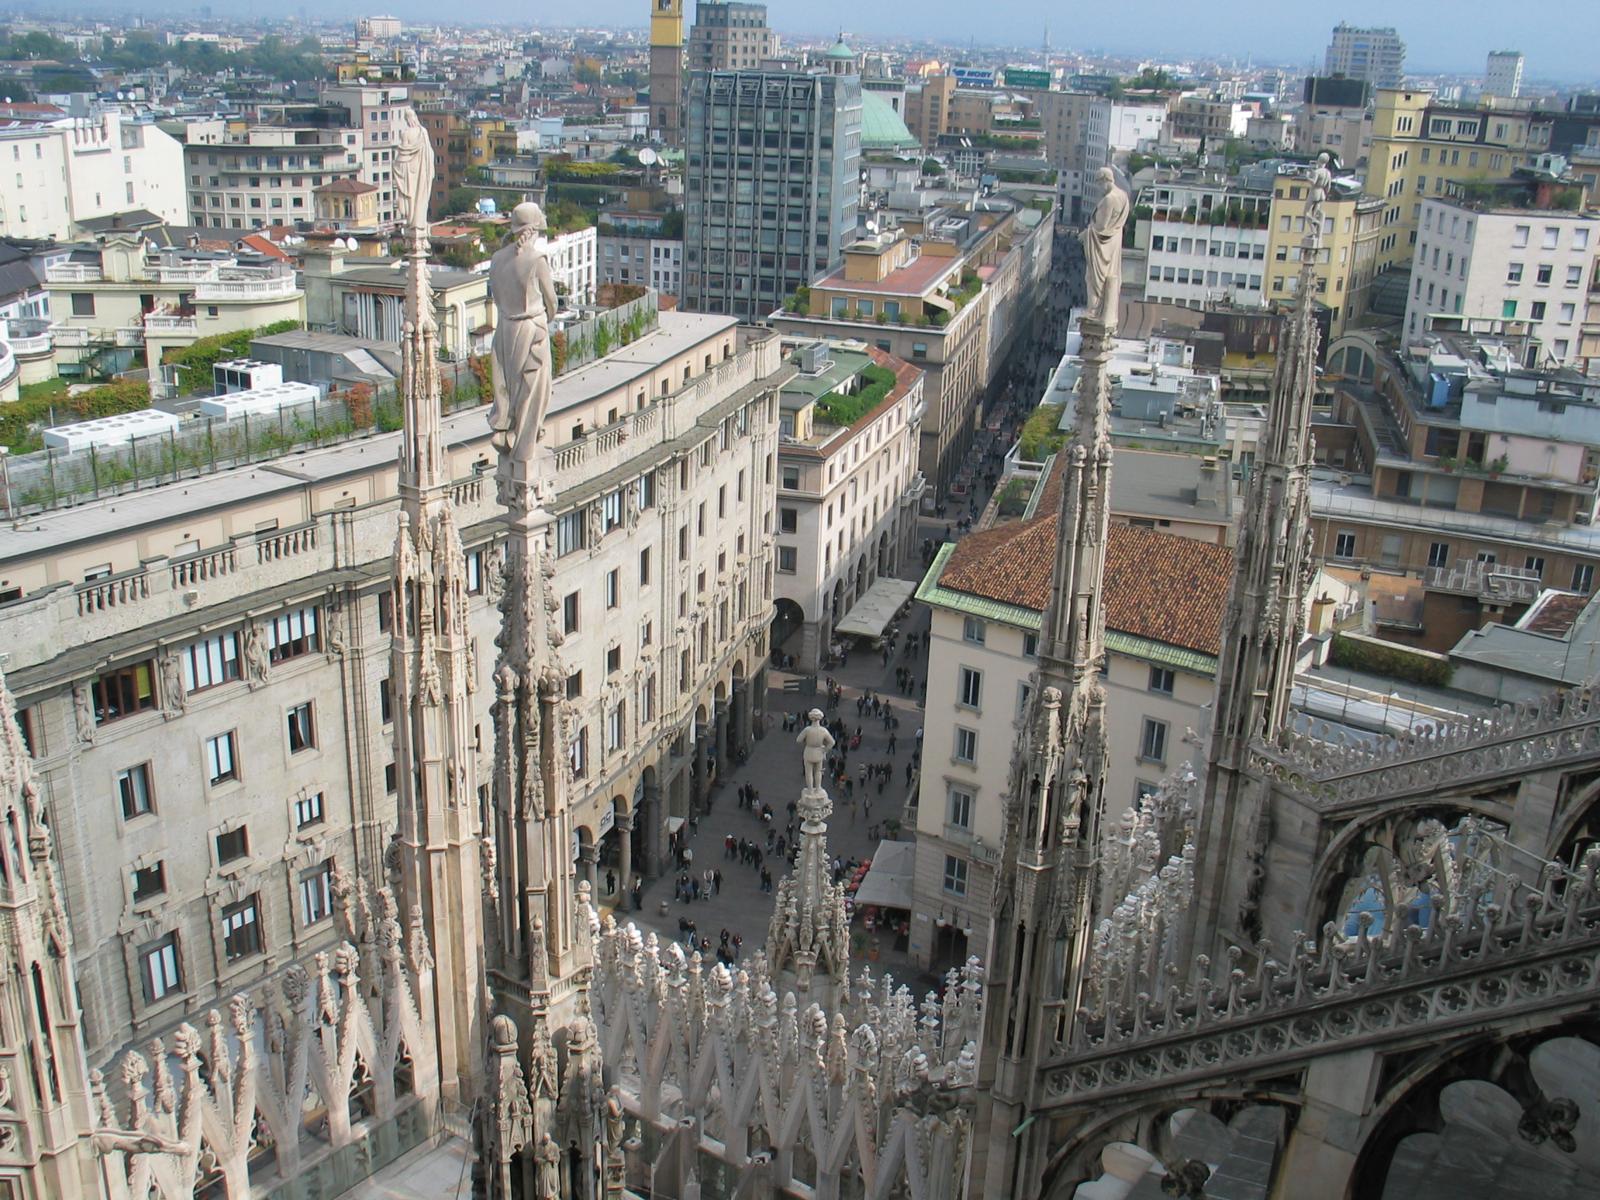 The view from the Duomo